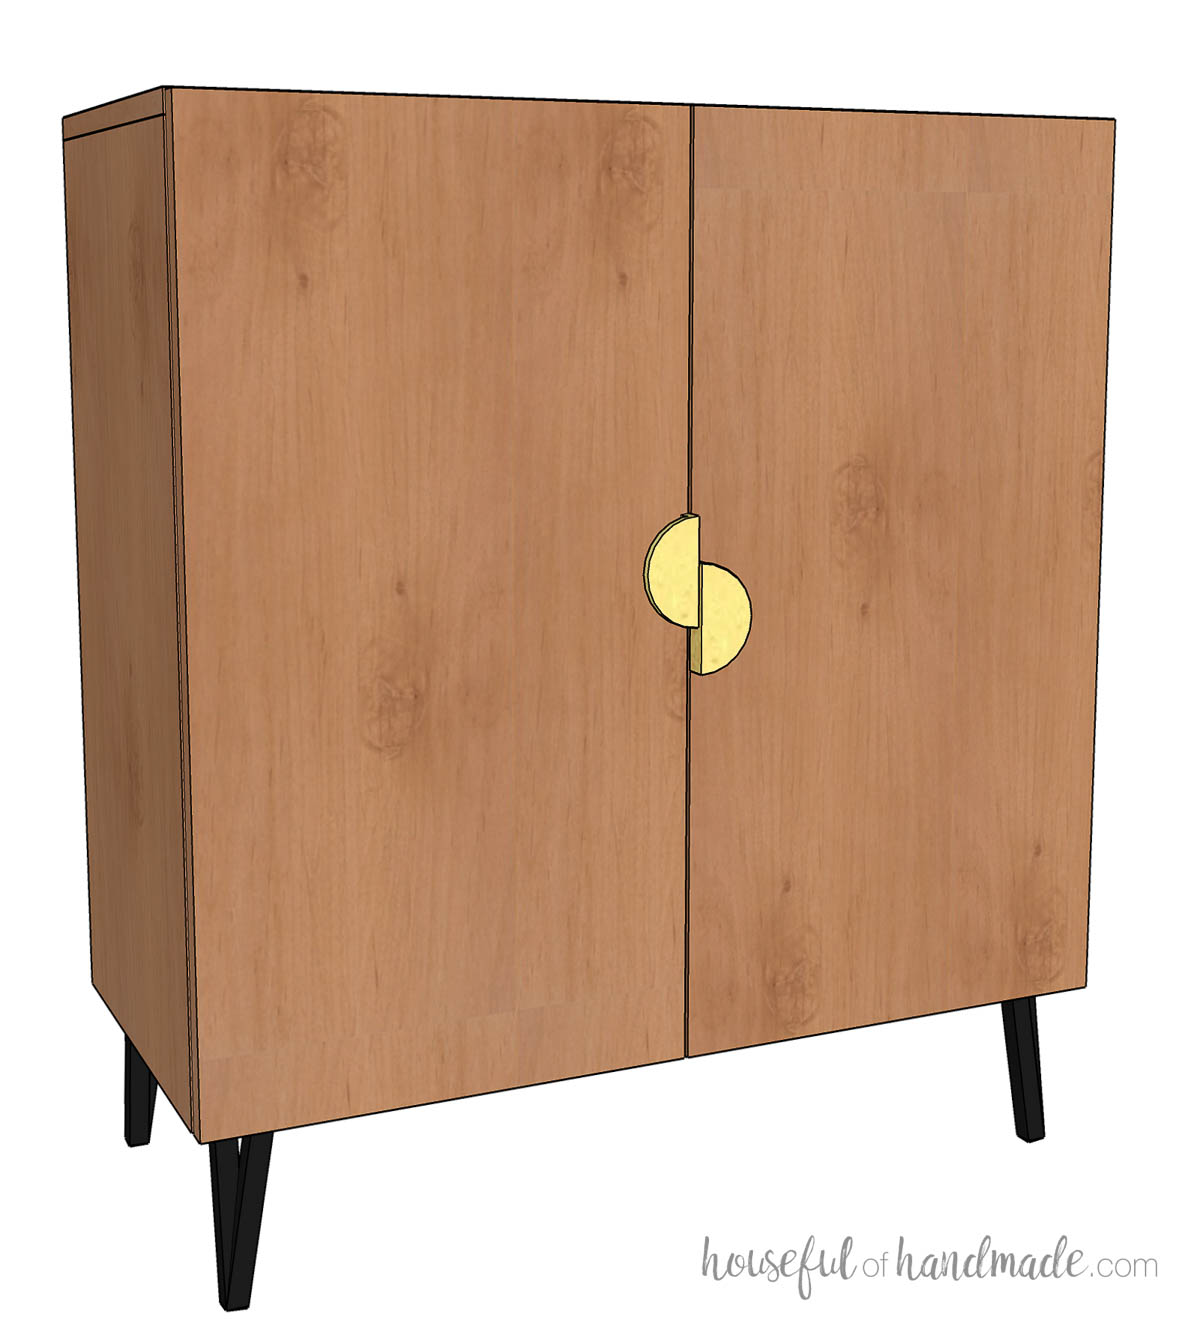 Slab cabinet doors on a furniture cabinet with legs and gold half moon pulls. 